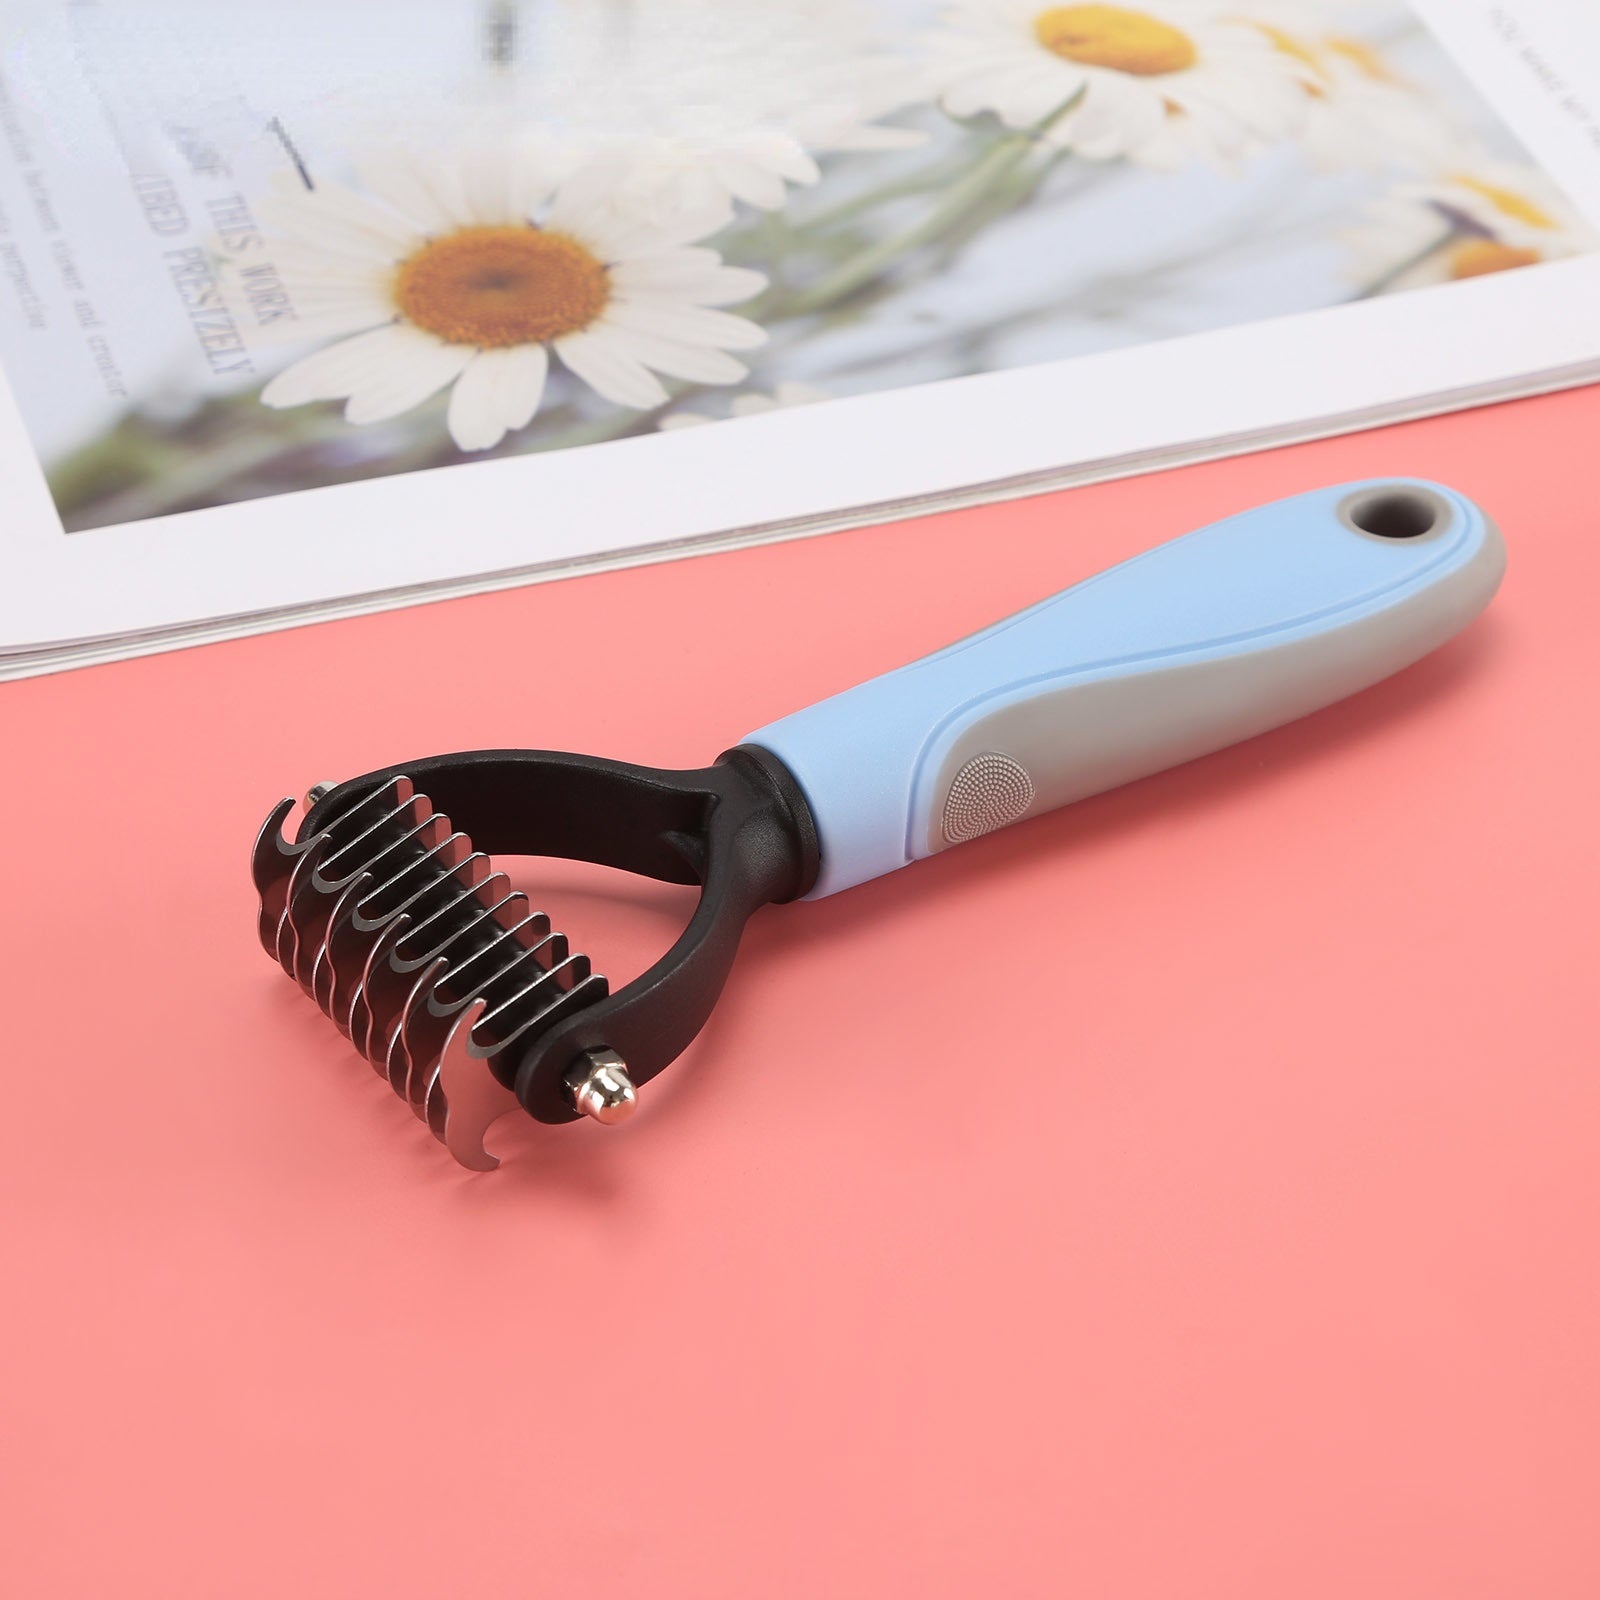 Dog Comb Pet Hair Removal Comb - Pets and More